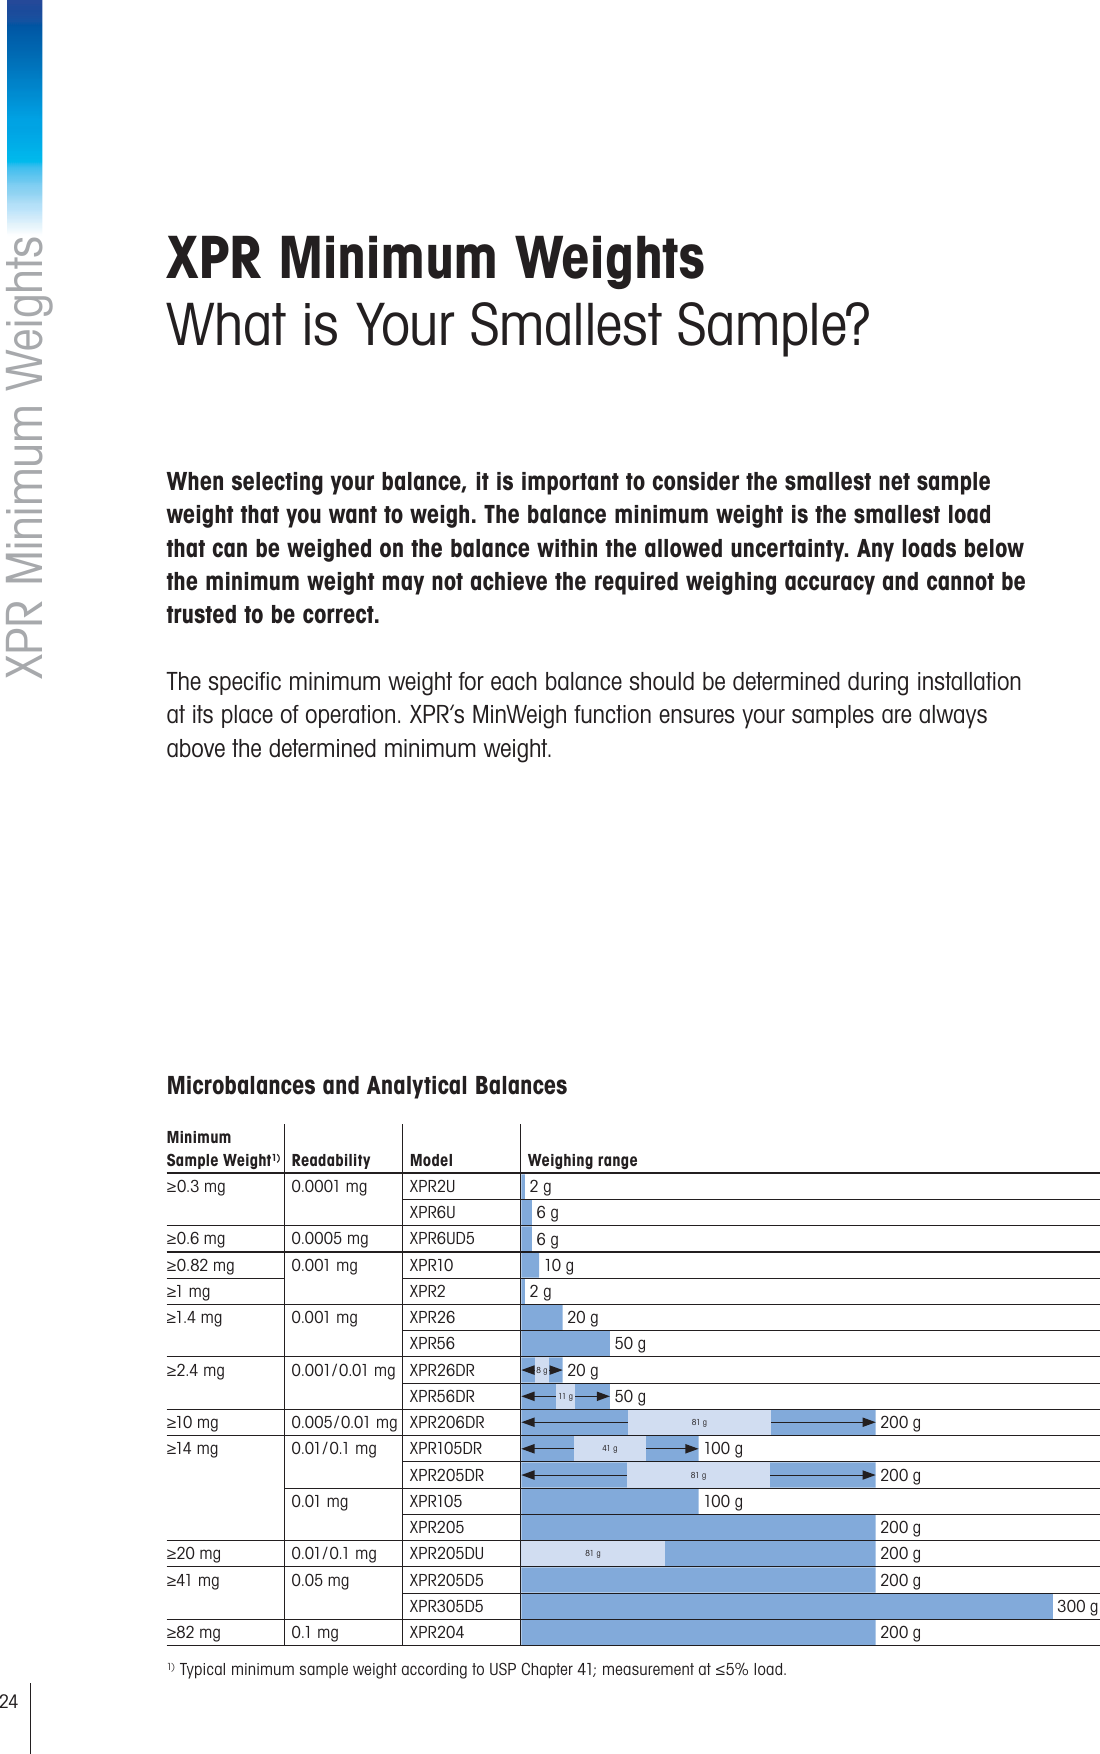 24When selecting your balance, it is important to consider the smallest net sample weight that you want to weigh. The balance minimum weight is the smallest load that can be weighed on the balance within the allowed uncertainty. Any loads below the minimum weight may not achieve the required weighing accuracy and cannot be trusted to be correct.The specific minimum weight for each balance should be determined during installation at its place of operation. XPR’s MinWeigh function ensures your samples are always above the determined minimum weight.Microbalances and Analytical BalancesMinimum Sample Weight1) Readability Model Weighing range≥0.3 mg 0.0001 mg XPR2U  2 gXPR6U  6 g≥0.6 mg 0.0005 mg XPR6UD5  6 g≥0.82 mg 0.001 mg XPR10  10 g≥1 mg XPR2  2 g≥1.4 mg 0.001 mg XPR26  20 gXPR56  50 g≥2.4 mg 0.0 01  /  0.01   m g XPR26DR 8 g  20 gXPR56DR 11  g  50 g≥10 mg 0.005 / 0.01  mg XPR206DR  200 g≥14 mg 0.01  /  0.1   m g XPR105DR 41 g  100 gXPR205DR 81 g  200 g0.01 mg XPR105  100 gXPR205  200 g≥20 mg 0.01  /  0.1   m g XPR205DU 81 g  200 g≥41 mg 0.05 mg XPR205D5  200 gXPR305D5  300 g≥82 mg 0.1  m g XPR204  200 g1) Typical minimum sample weight according to USP Chapter 41; measurement at ≤5% load.XPR Minimum WeightsWhat is Your Smallest Sample?XPR Minimum Weights81 g